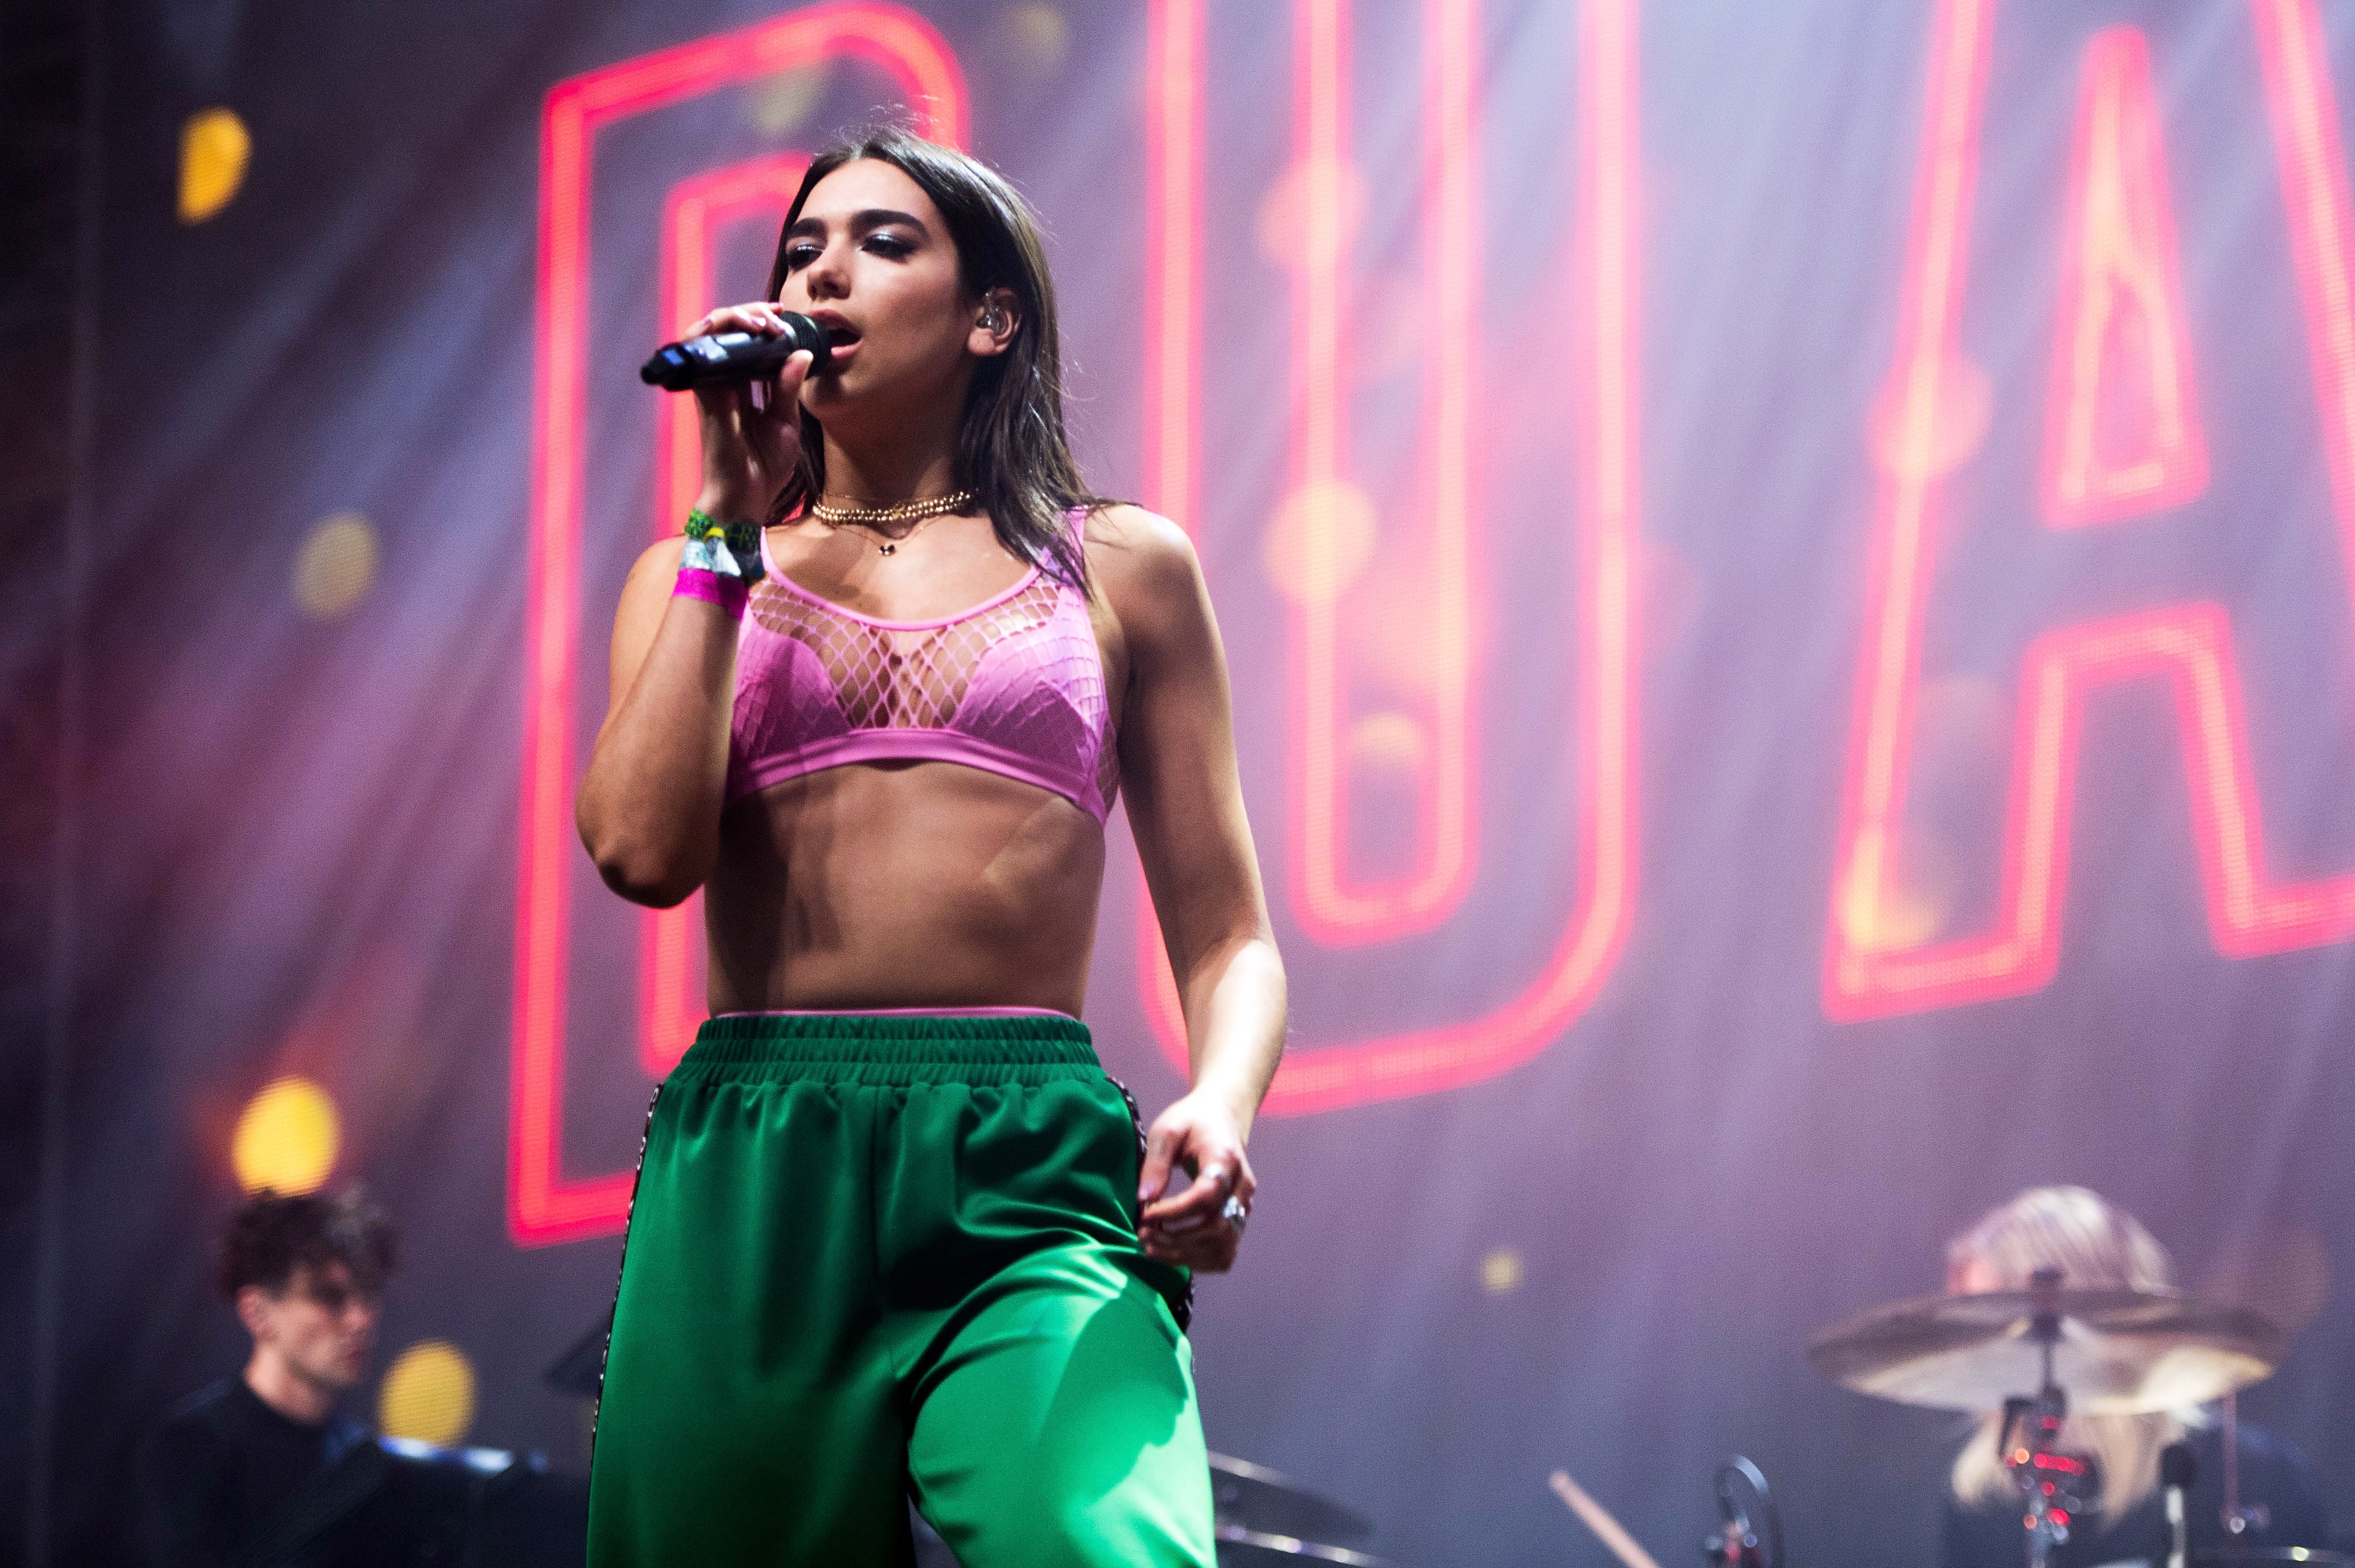 glastonbury, dua lipa, shania twain, coldplay, how to, when is dua lipa performing on the pyramid stage at glastonbury and how to watch